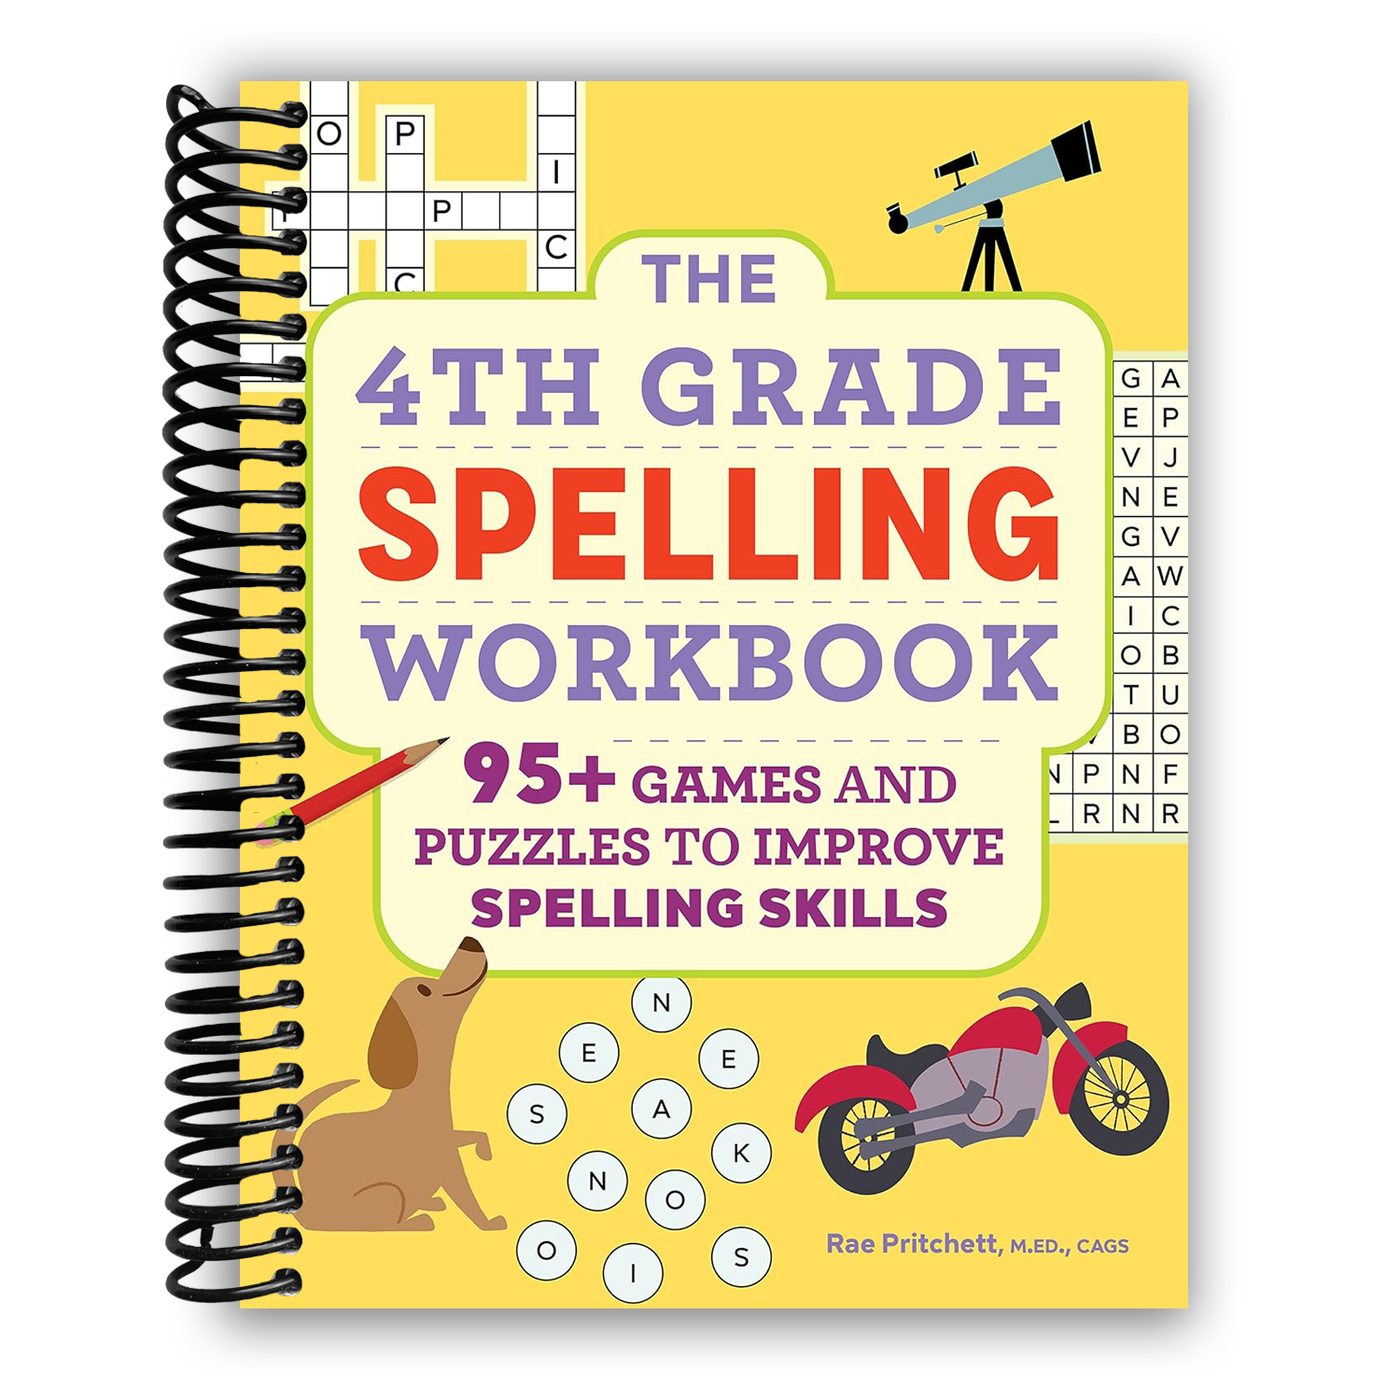 The 4th Grade Spelling Workbook: 95+ Games and Puzzles to Improve Spelling Skills (Spiral Bound)